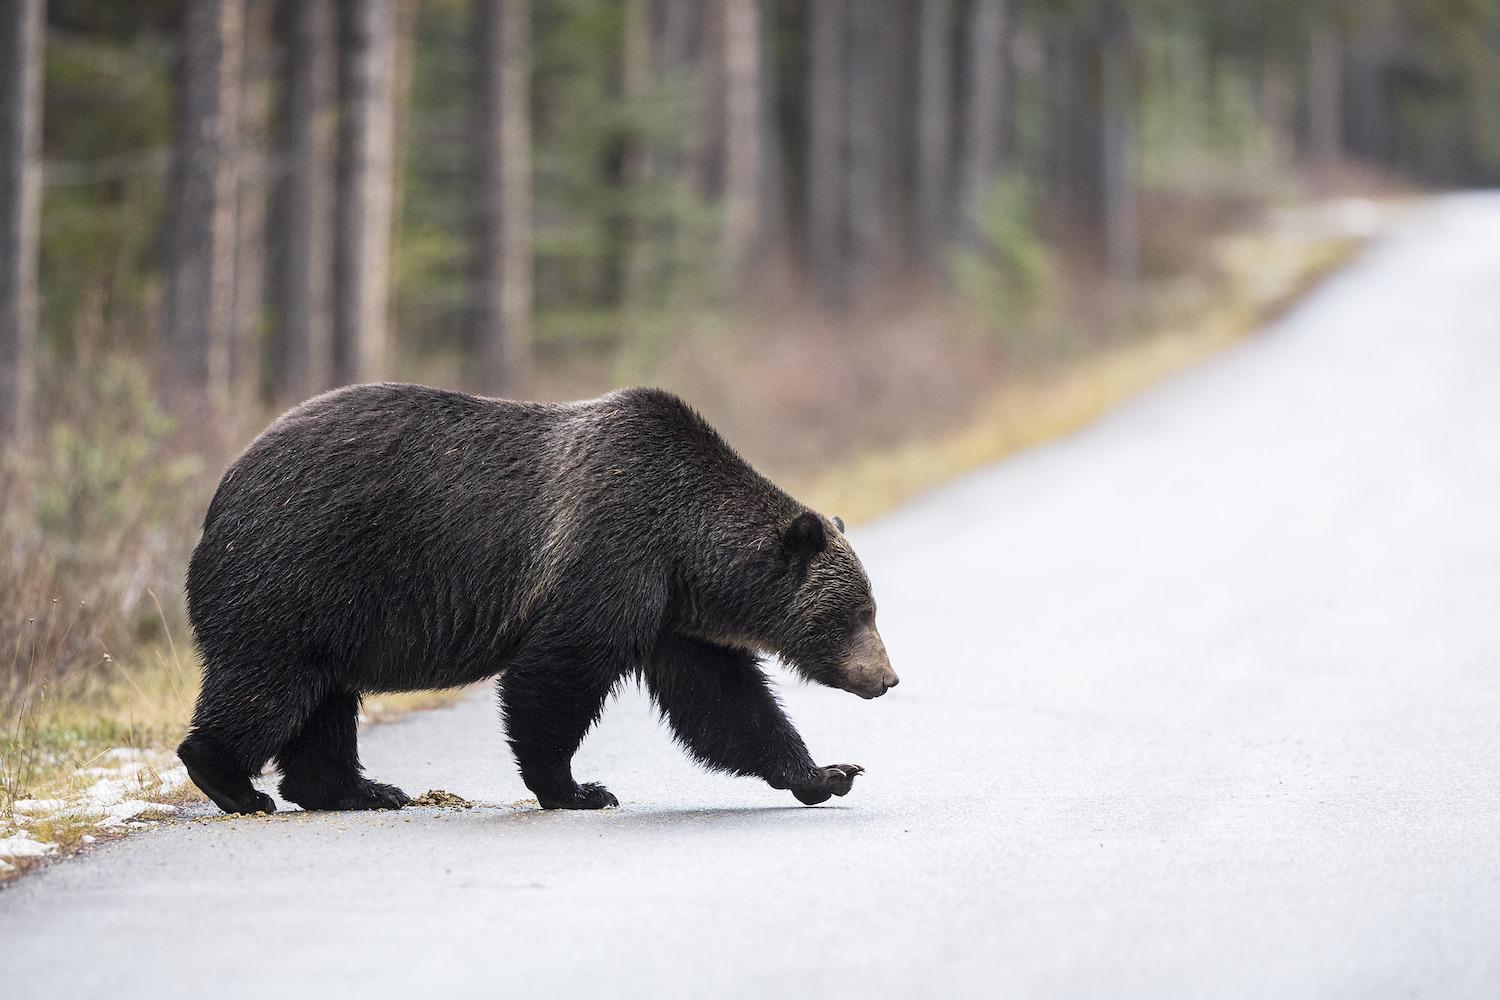 A grizzly bear crosses the road in Banff National Park.